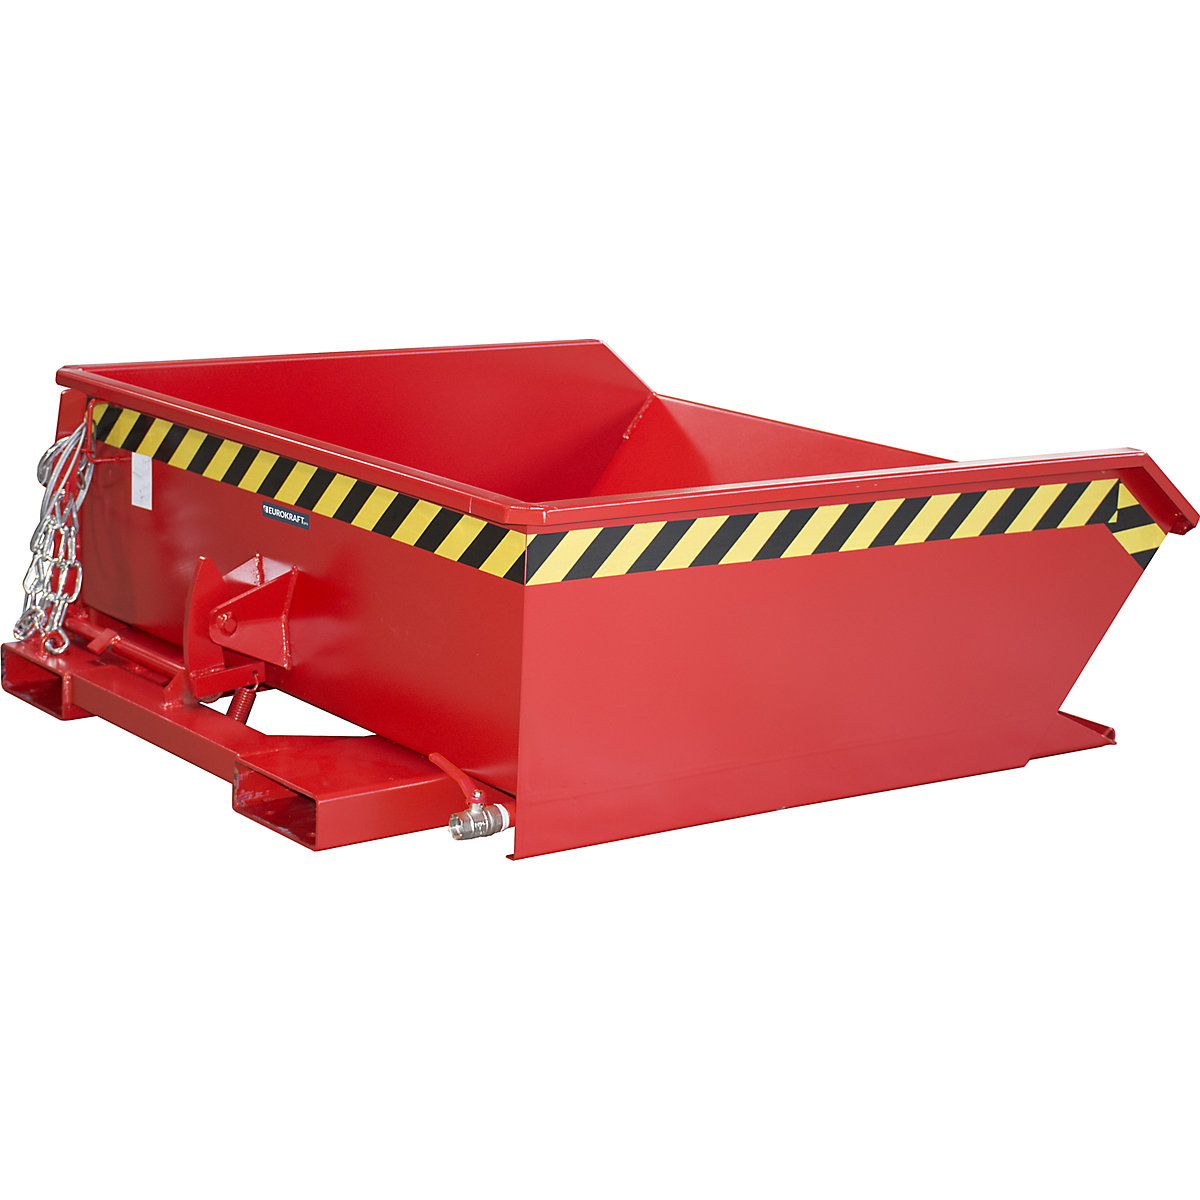 Mini tilting skip for metal swarf – eurokraft pro, low overall height, capacity 0.46 m³, red RAL 3000-6